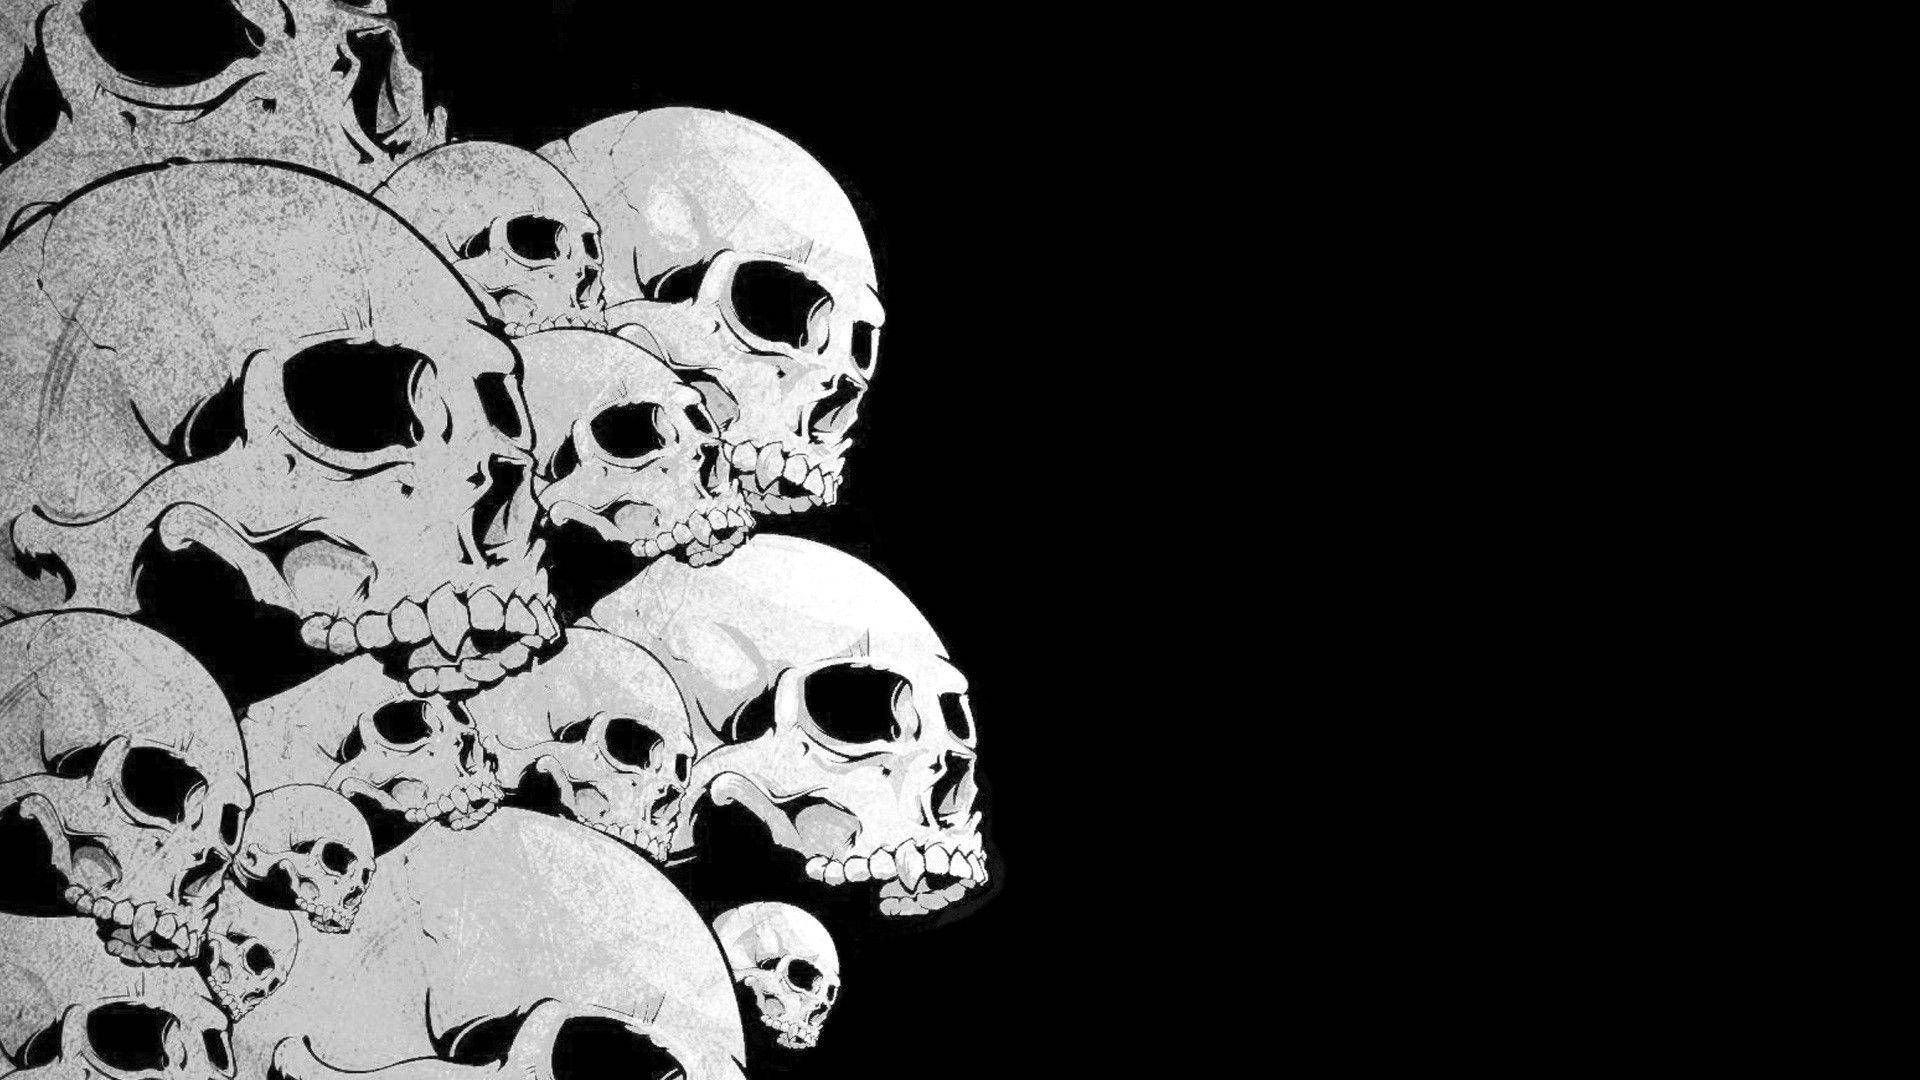 A bold statement in black and white, the Black Skull makes a statement. Wallpaper